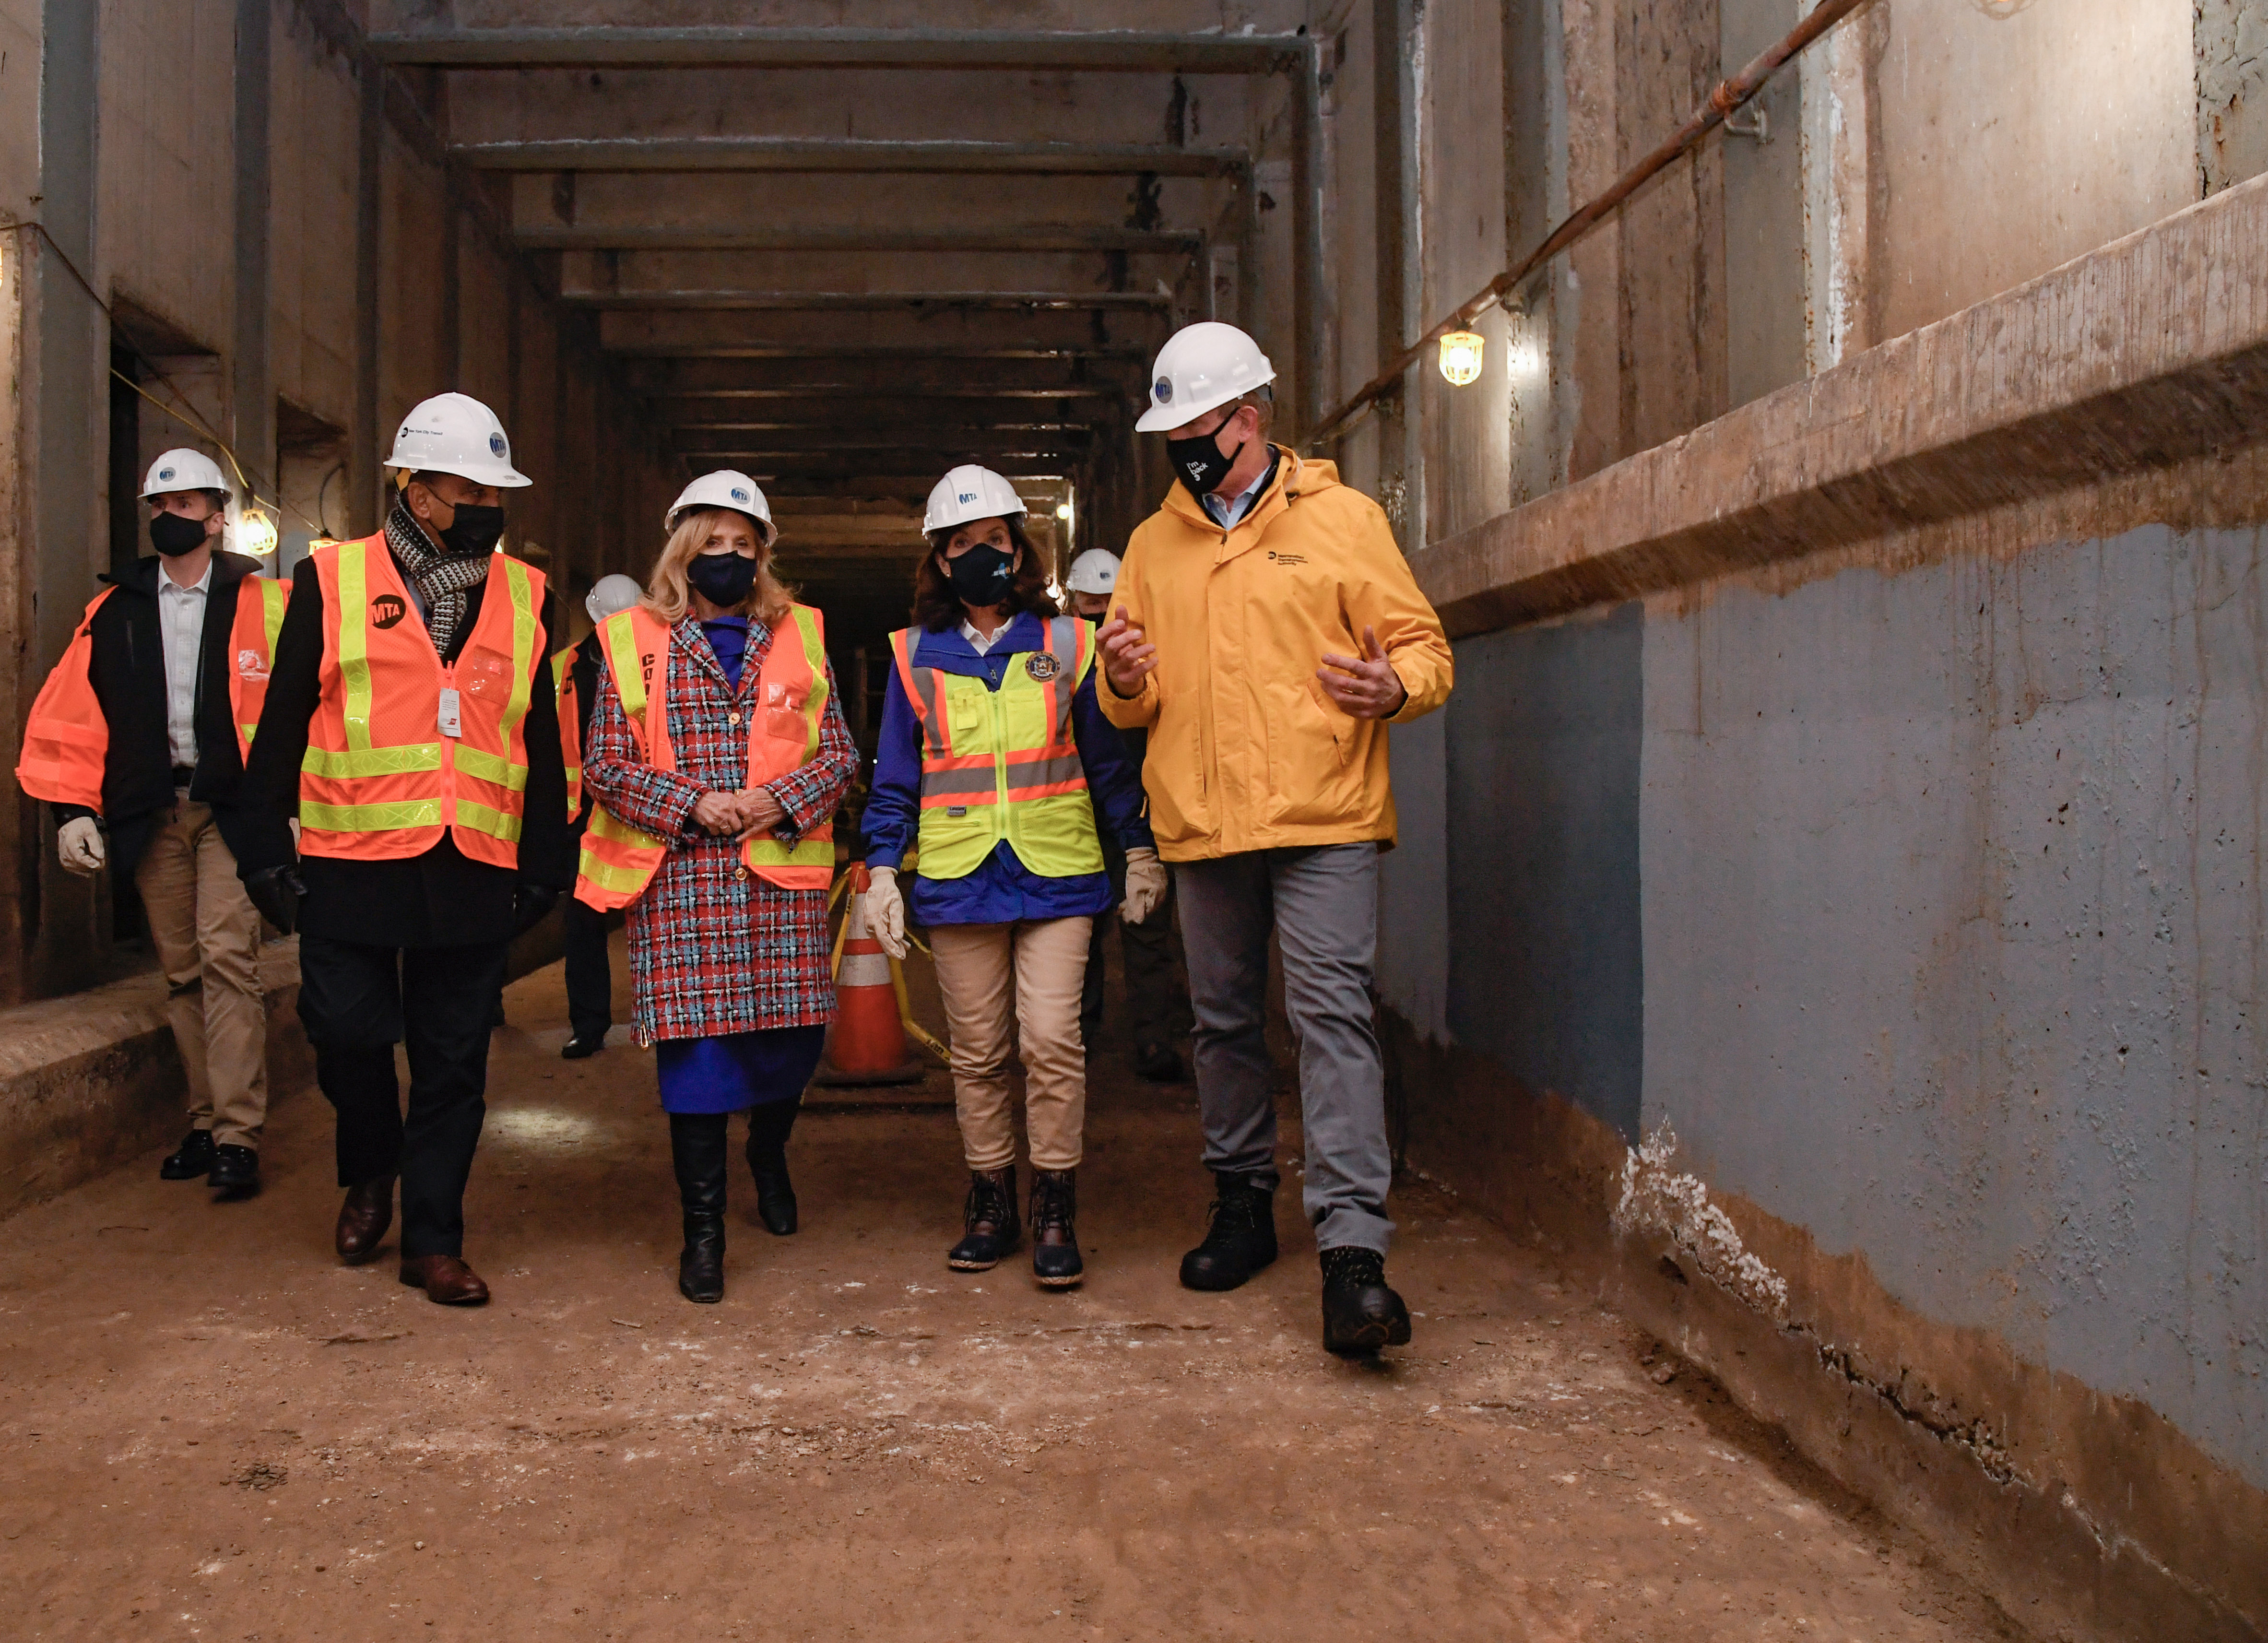 Gov. Kathy Hochul, MTA Acting Chair & CEO Janno Lieber, Rep. Adriano Espaillat, Rep. Carolyn Maloney, and Manhattan Borough President Gale Brewer tour the Second Avenue Subway Phase 2 tunnel in East Harlem between 110 St and 120 St on Tue., November 23, 2021.